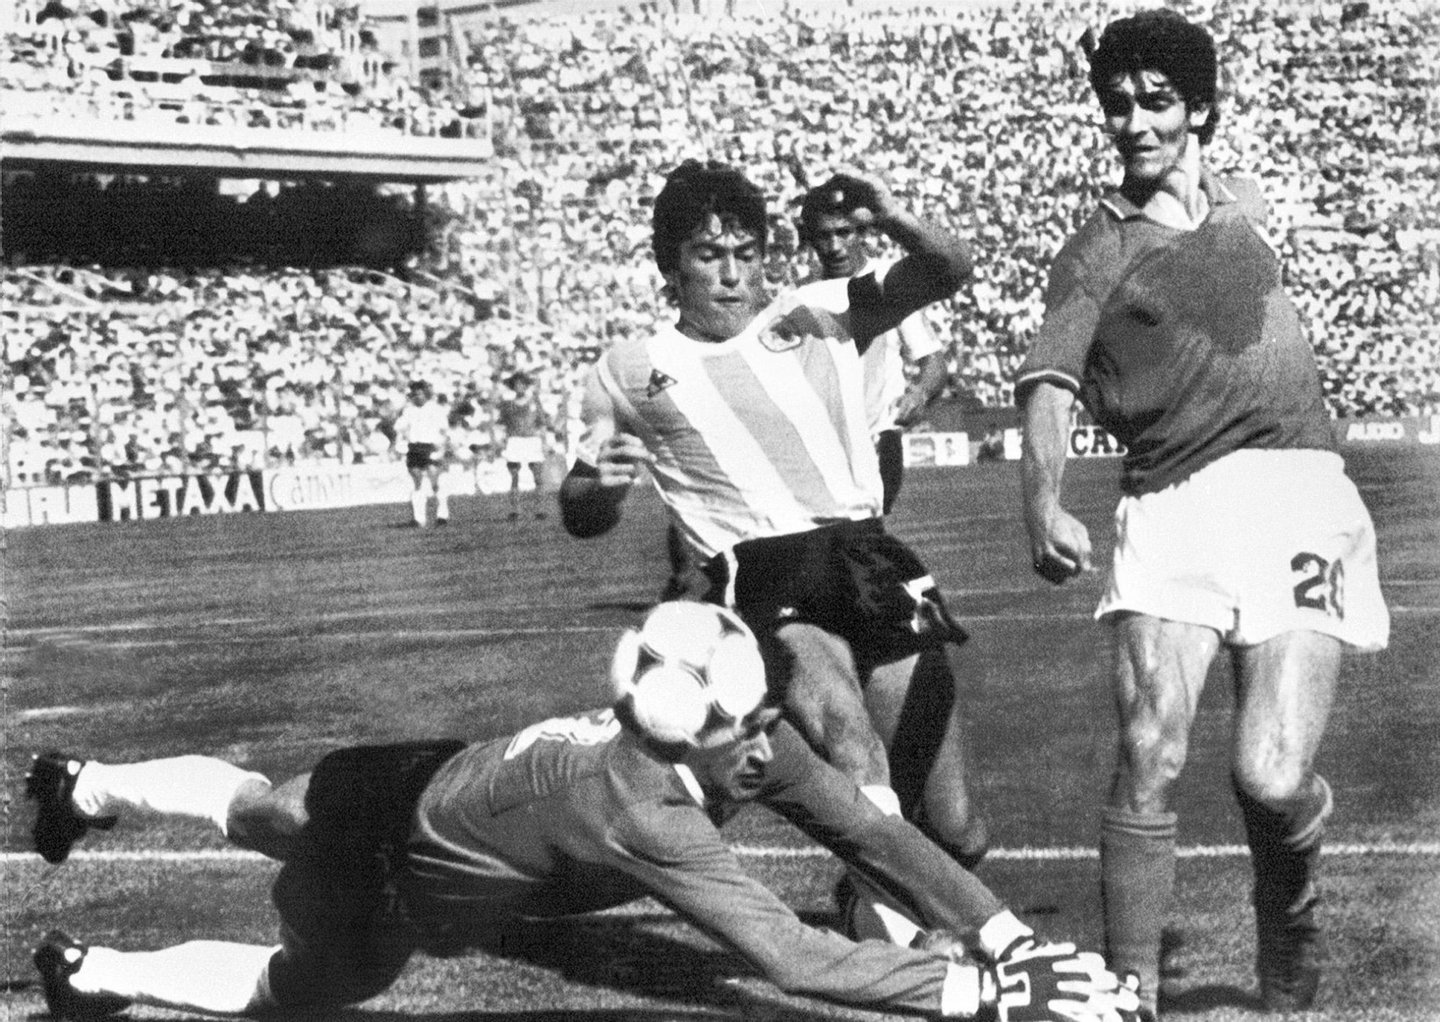 BARCELONA, SPAIN - JUNE 29: Argentinian goalkeeper Ubaldo Fillol and captain Daniel Passarella prevent Italian striker Paolo Rossi from scoring 29 June 1982 in Barcelona during the World Cup second round soccer match between Italy and Argentina. Italy beat Argentina 2-1 despite a goal by Passarella. AFP PHOTO (Photo credit should read STAFF/AFP/Getty Images)